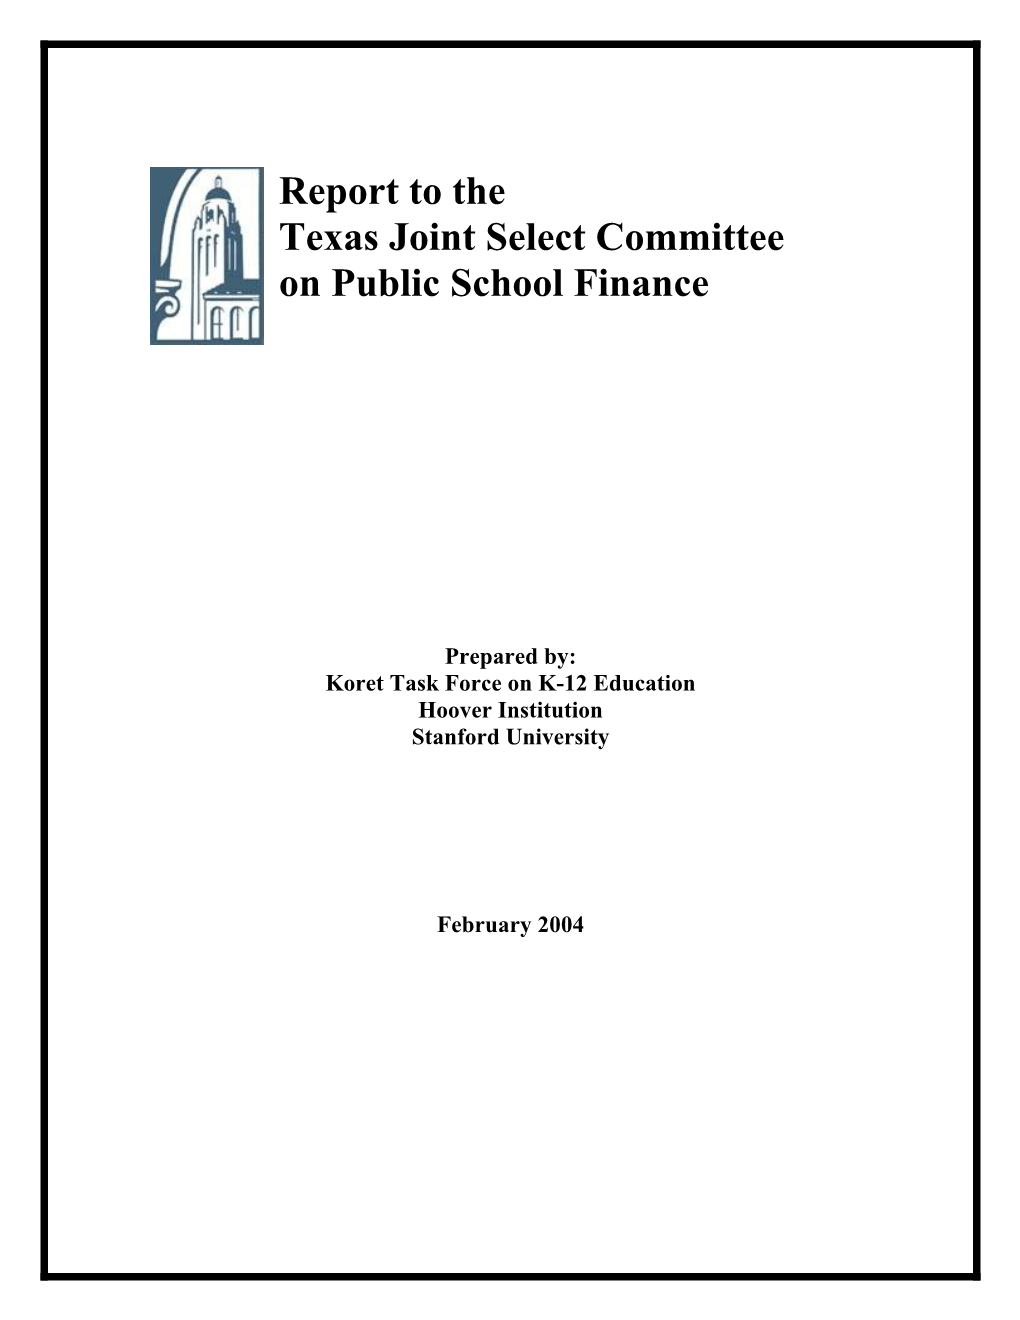 Report to the Texas Joint Select Committee on Public School Finance